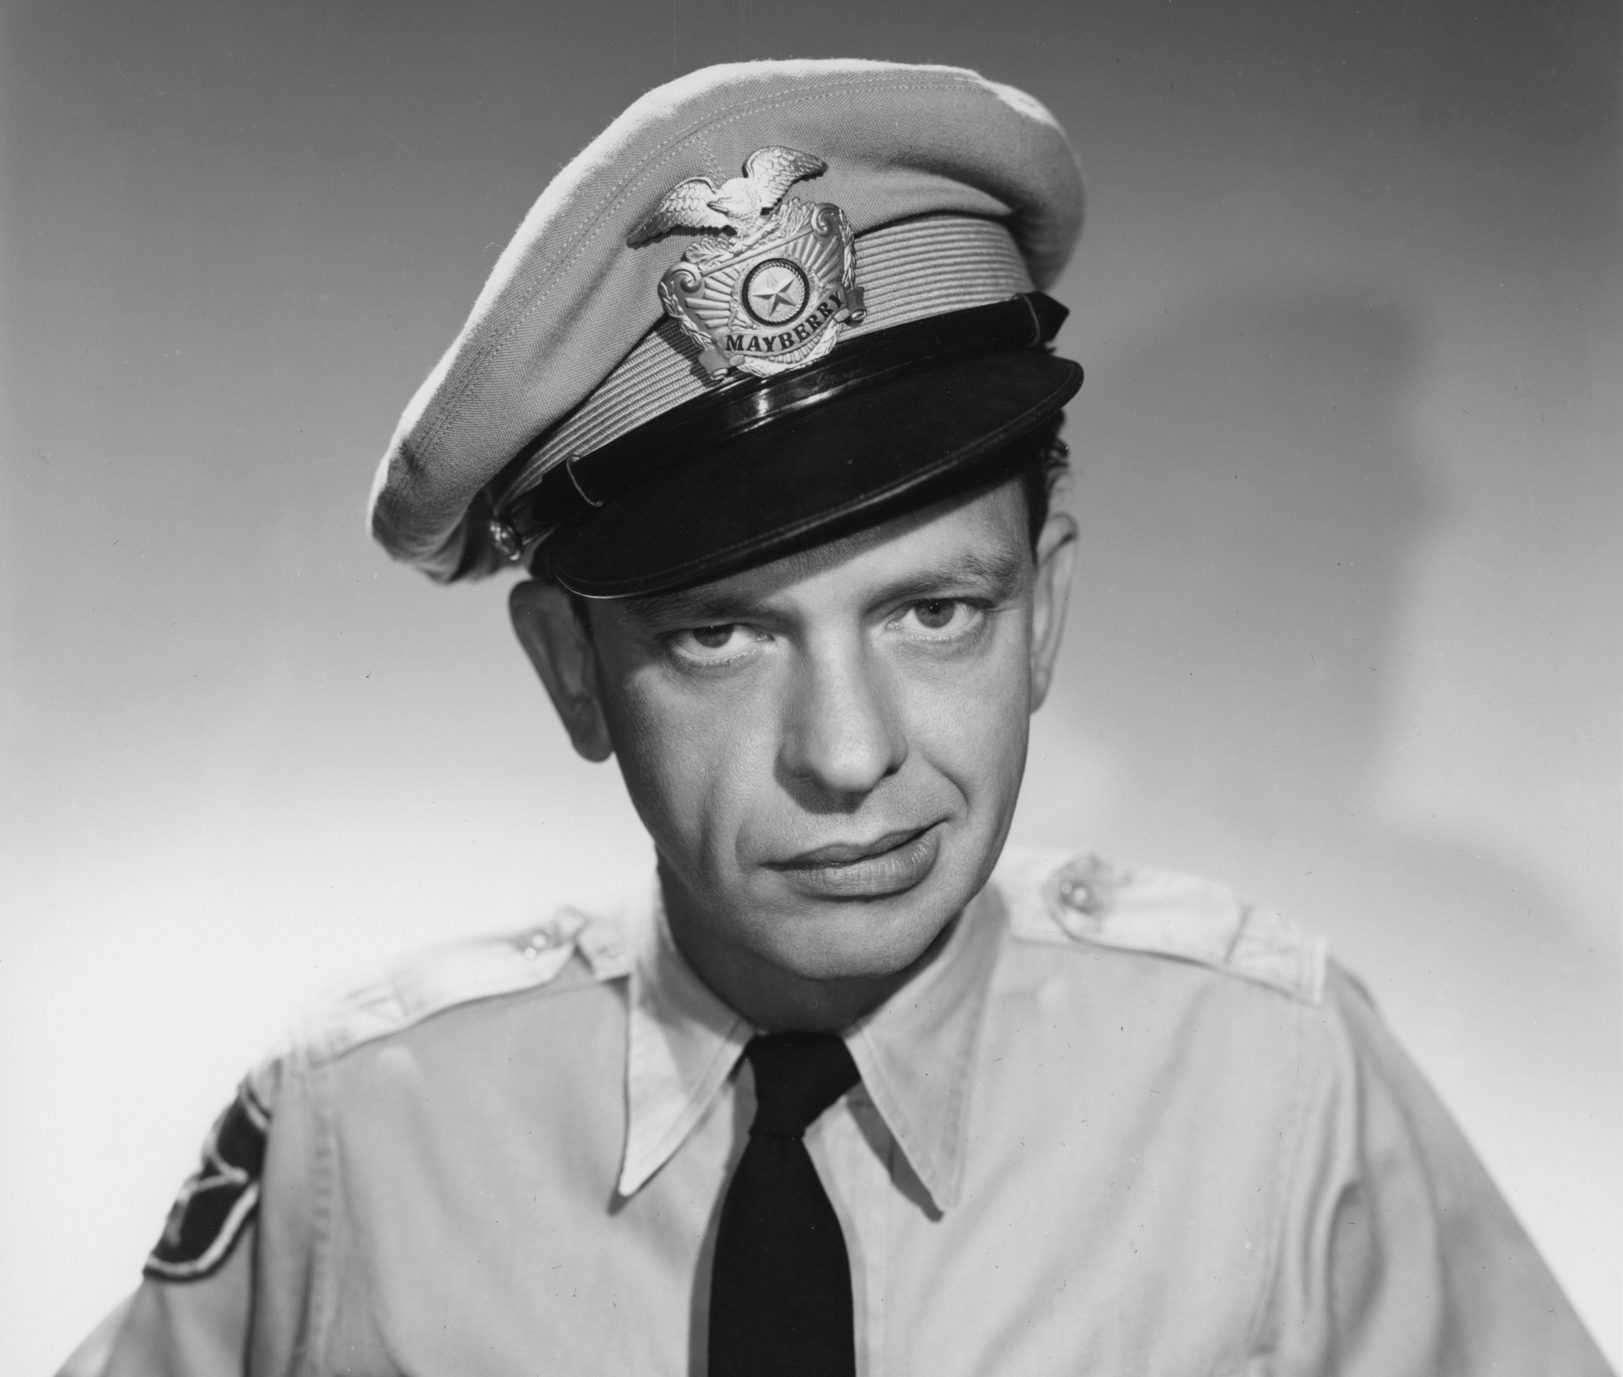 Don knotts photos found on the web 